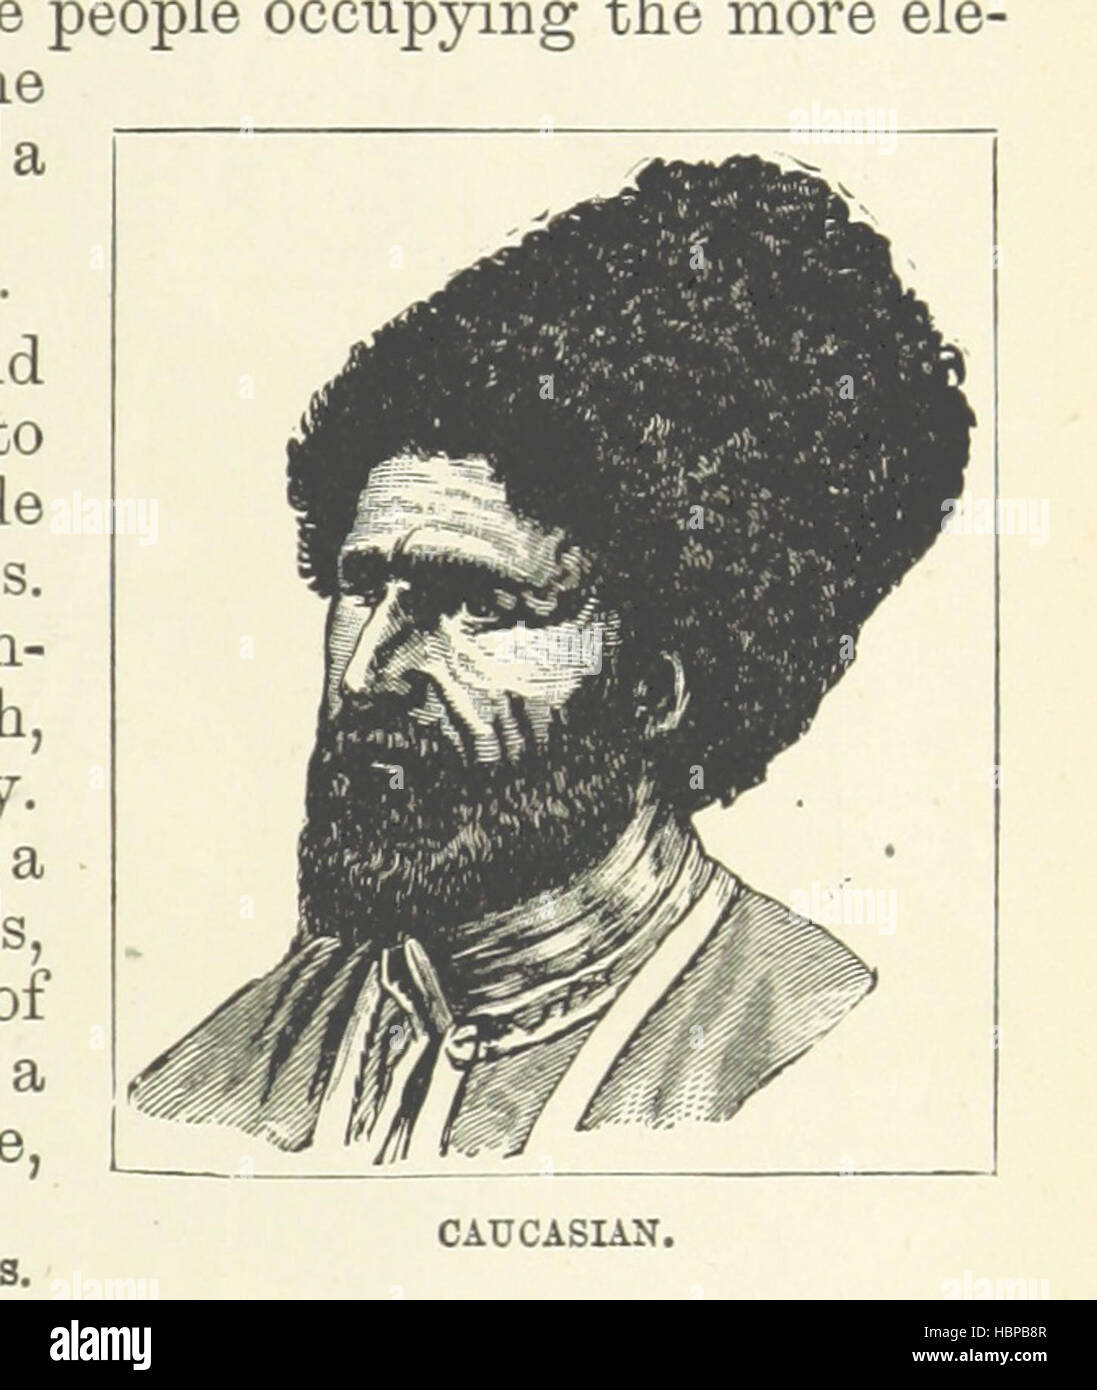 Image taken from page 327 of '[The World's Inhabitants; or, Mankind, animals & plants ... With ... illustrations, etc.]' Image taken from page 327 of '[The World's Inhabitants; or, Stock Photo